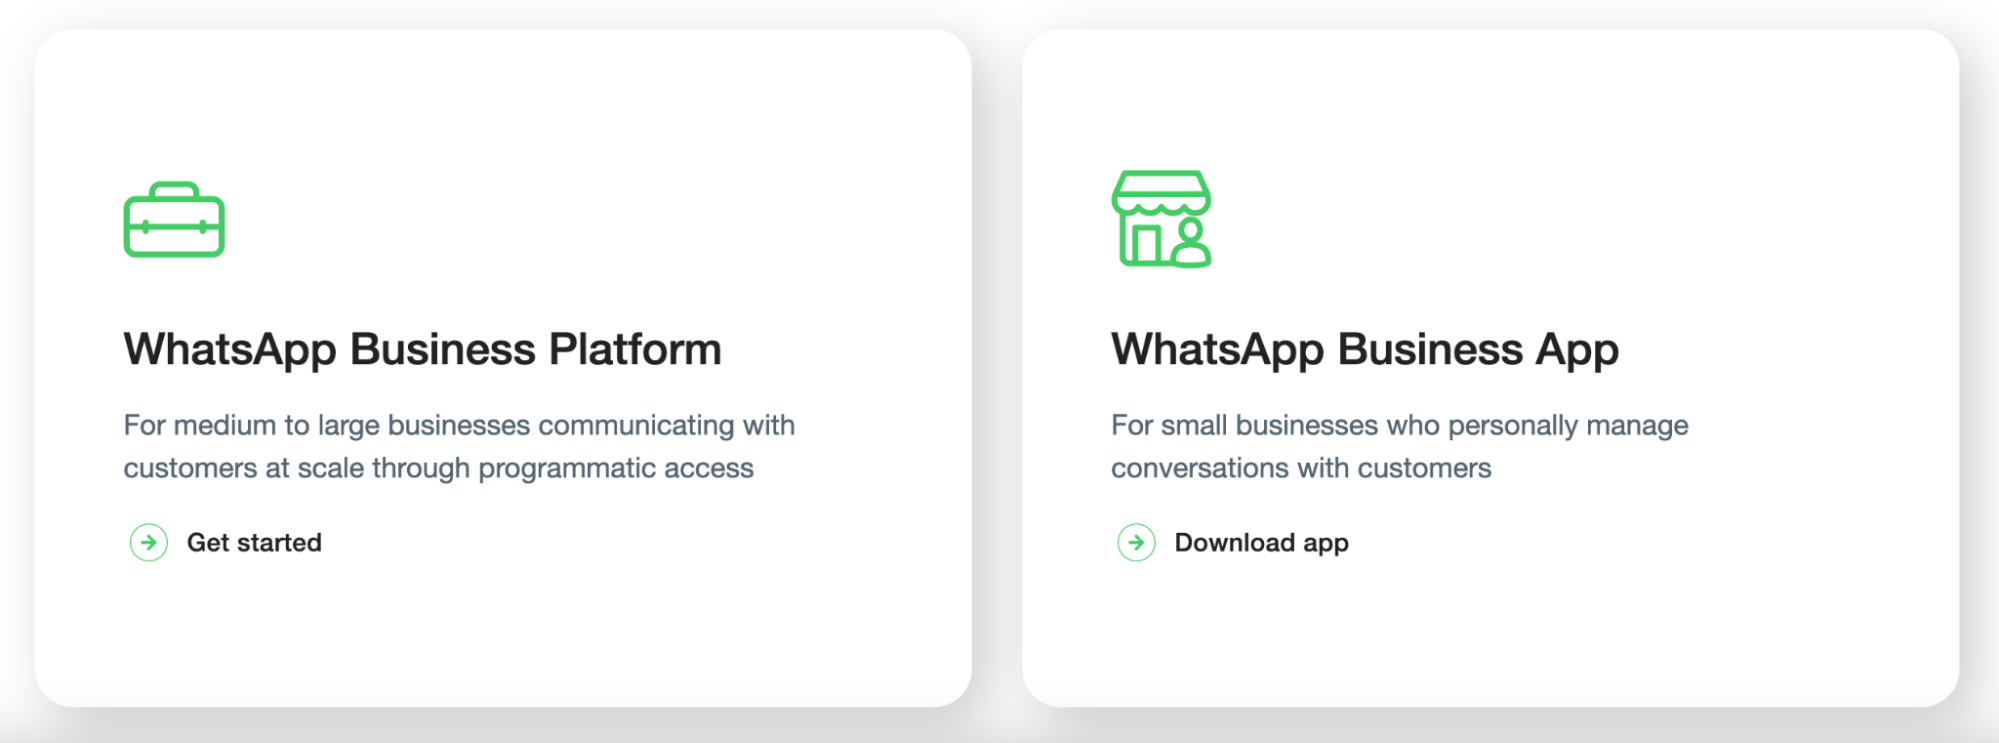 WhatsApp logo and business icons representing the process of setting up a WhatsApp Business account.